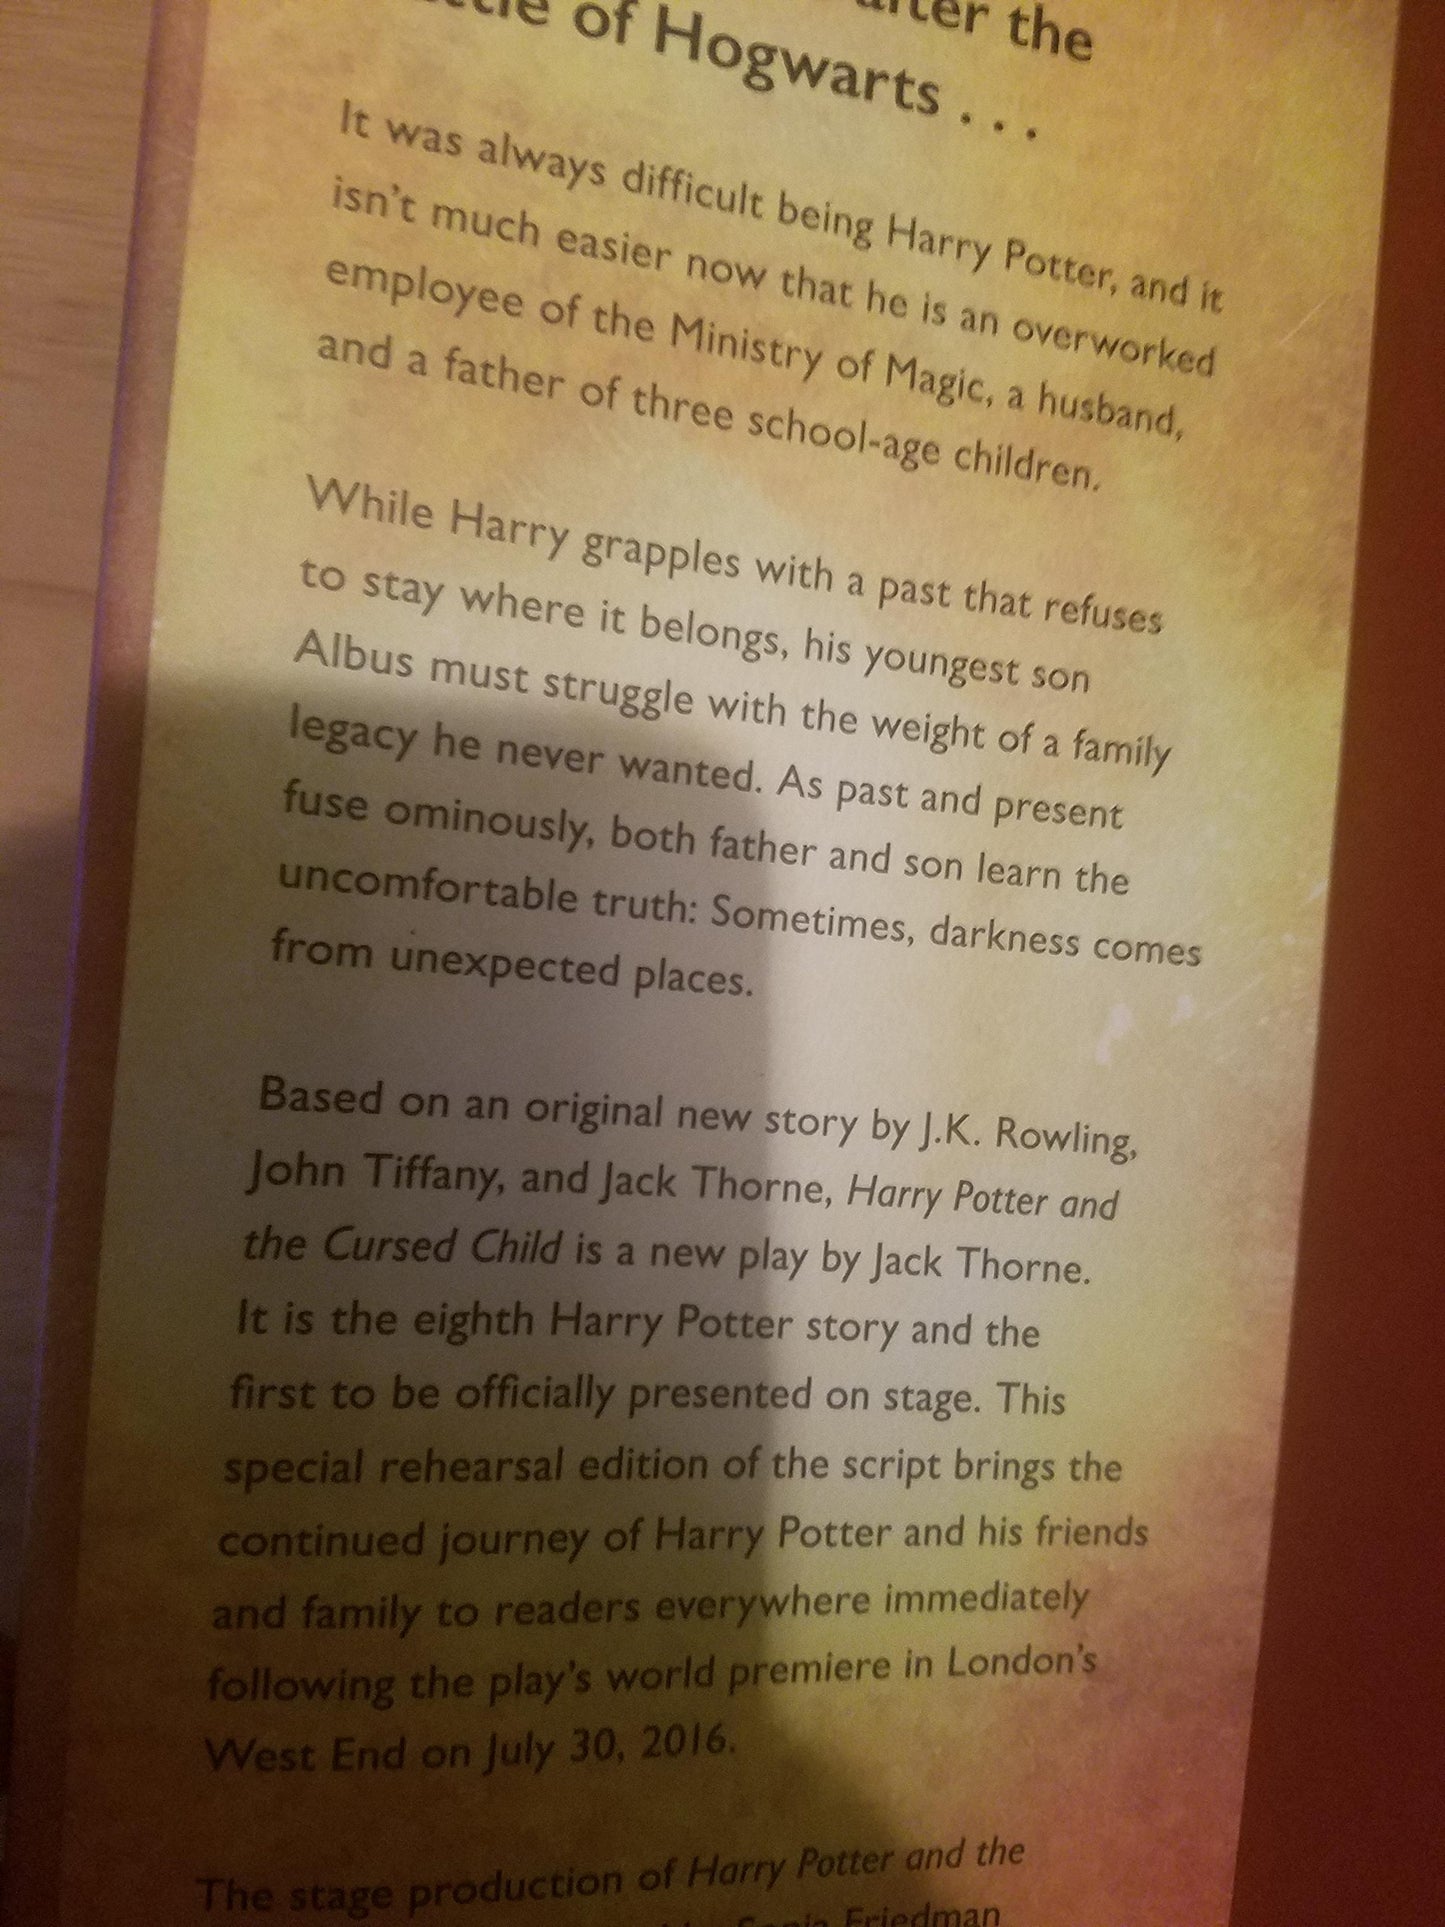 Harry Potter and the Cursed Child - Parts One & Two (Hardcover) educational books [Hardcover] J.K. Rowling